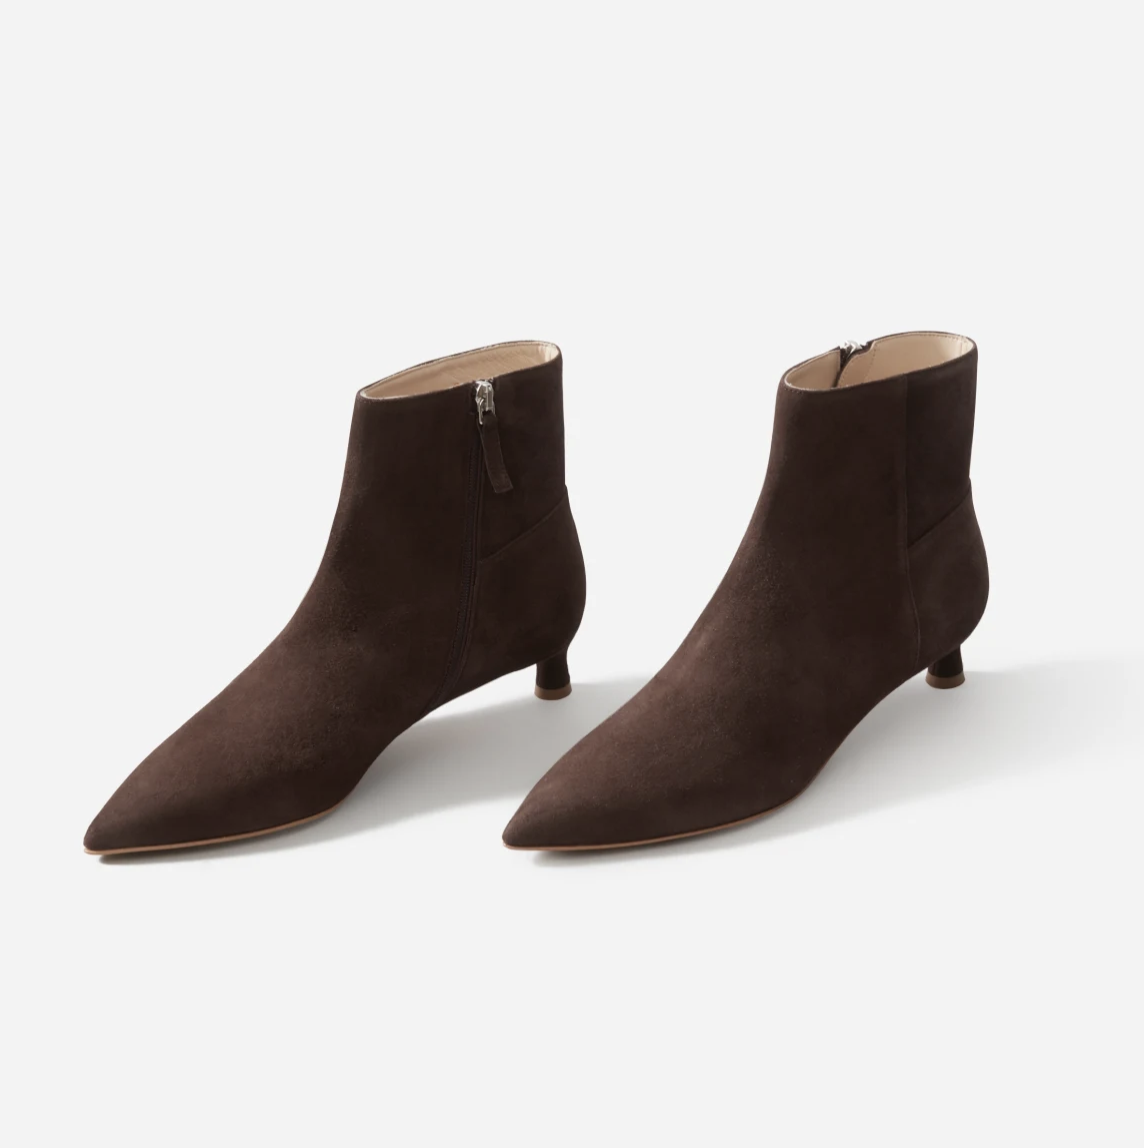 everlane-editor-boot-brown.png